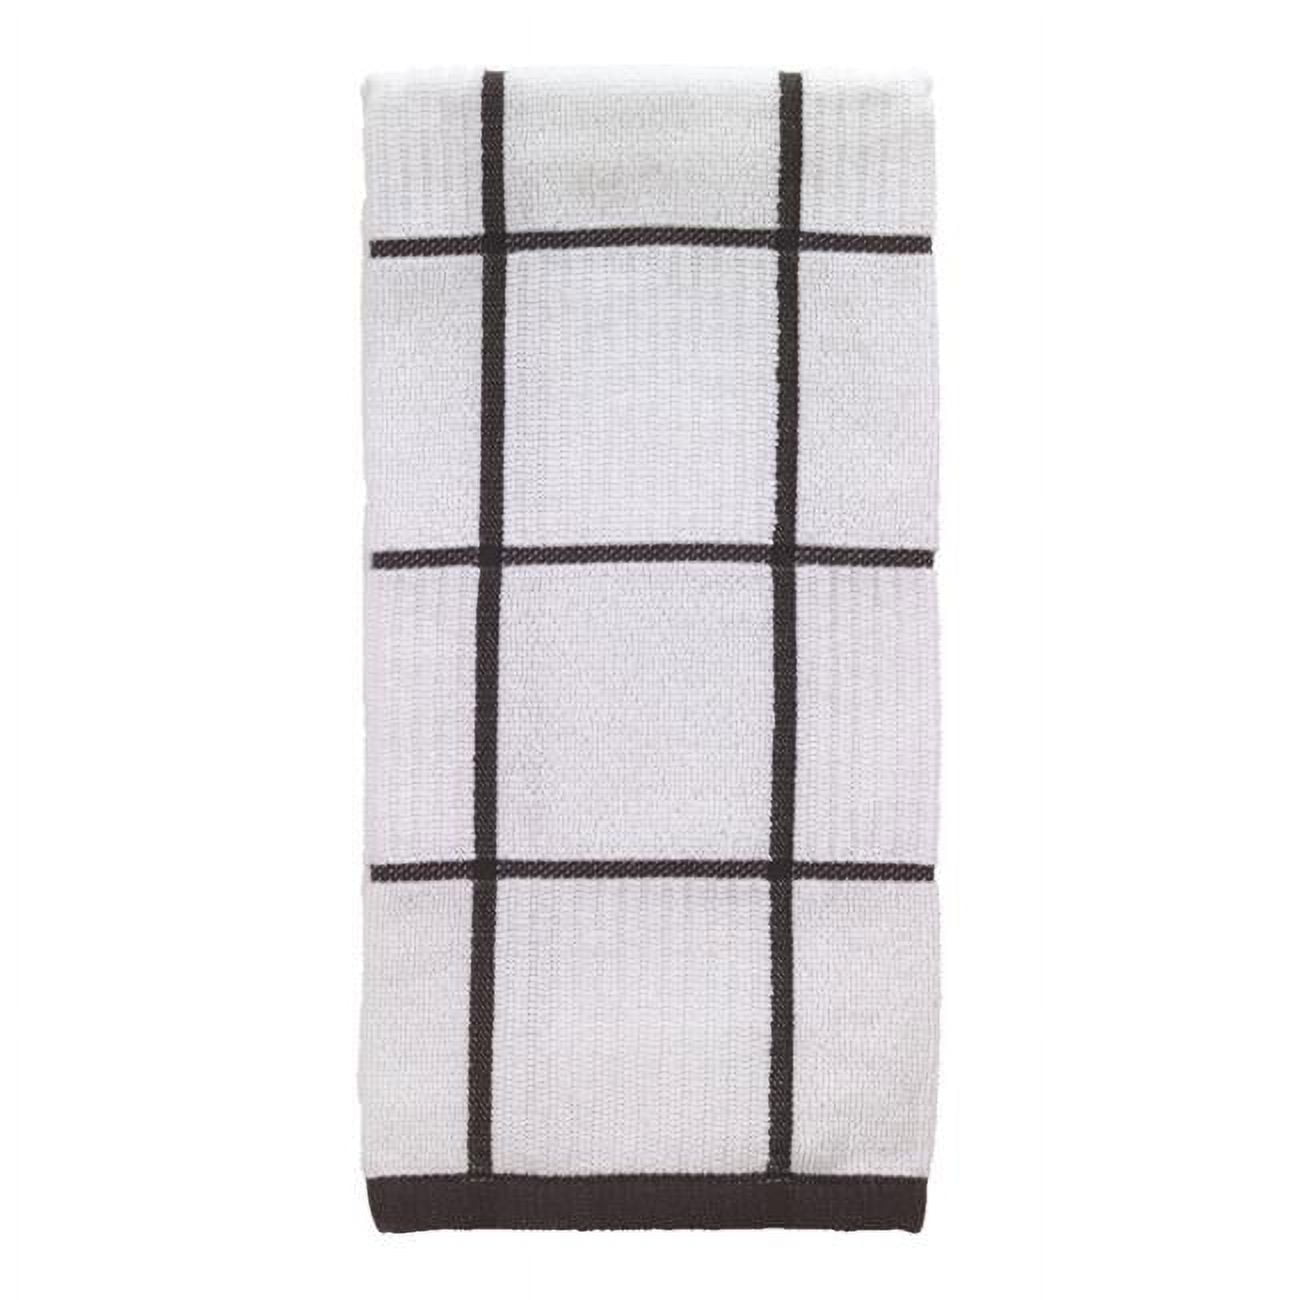 T-fal 6517536 Charcoal Cotton Kitchen Towel - Pack Of 6